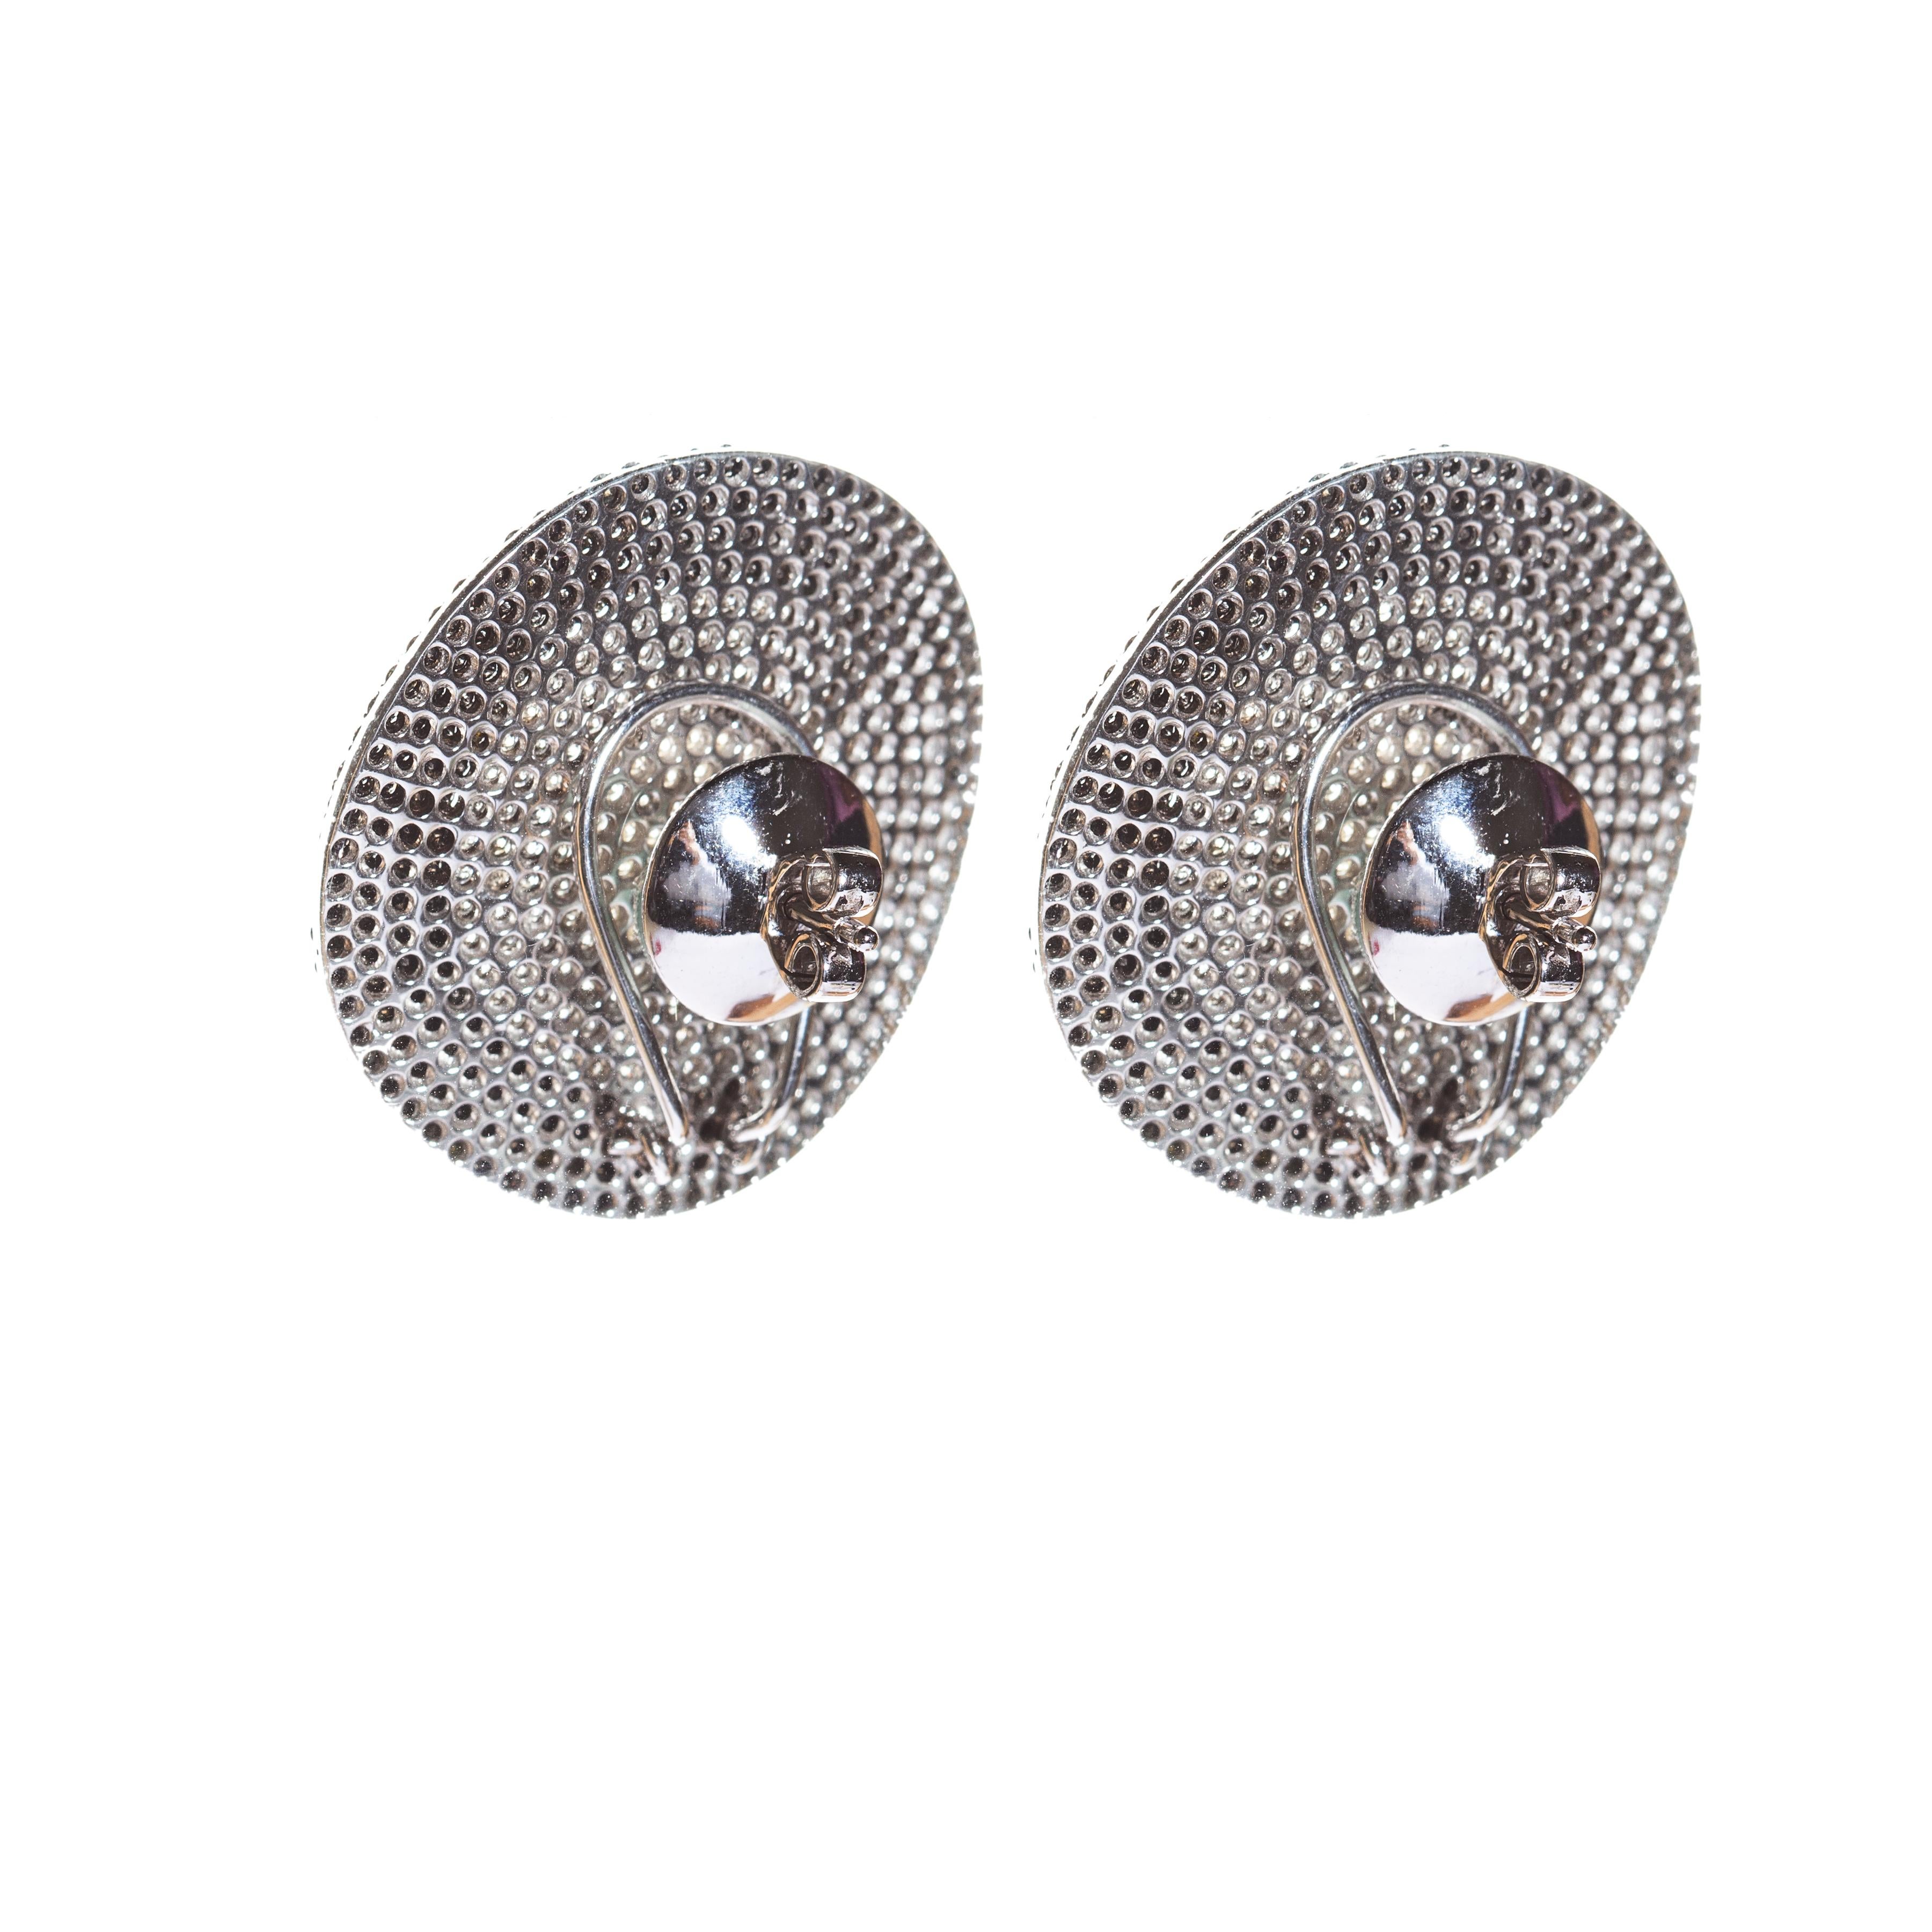 Contemporary Moon Phase Disc Earrings in Silver with Diamonds and 14 Karat Gold For Sale